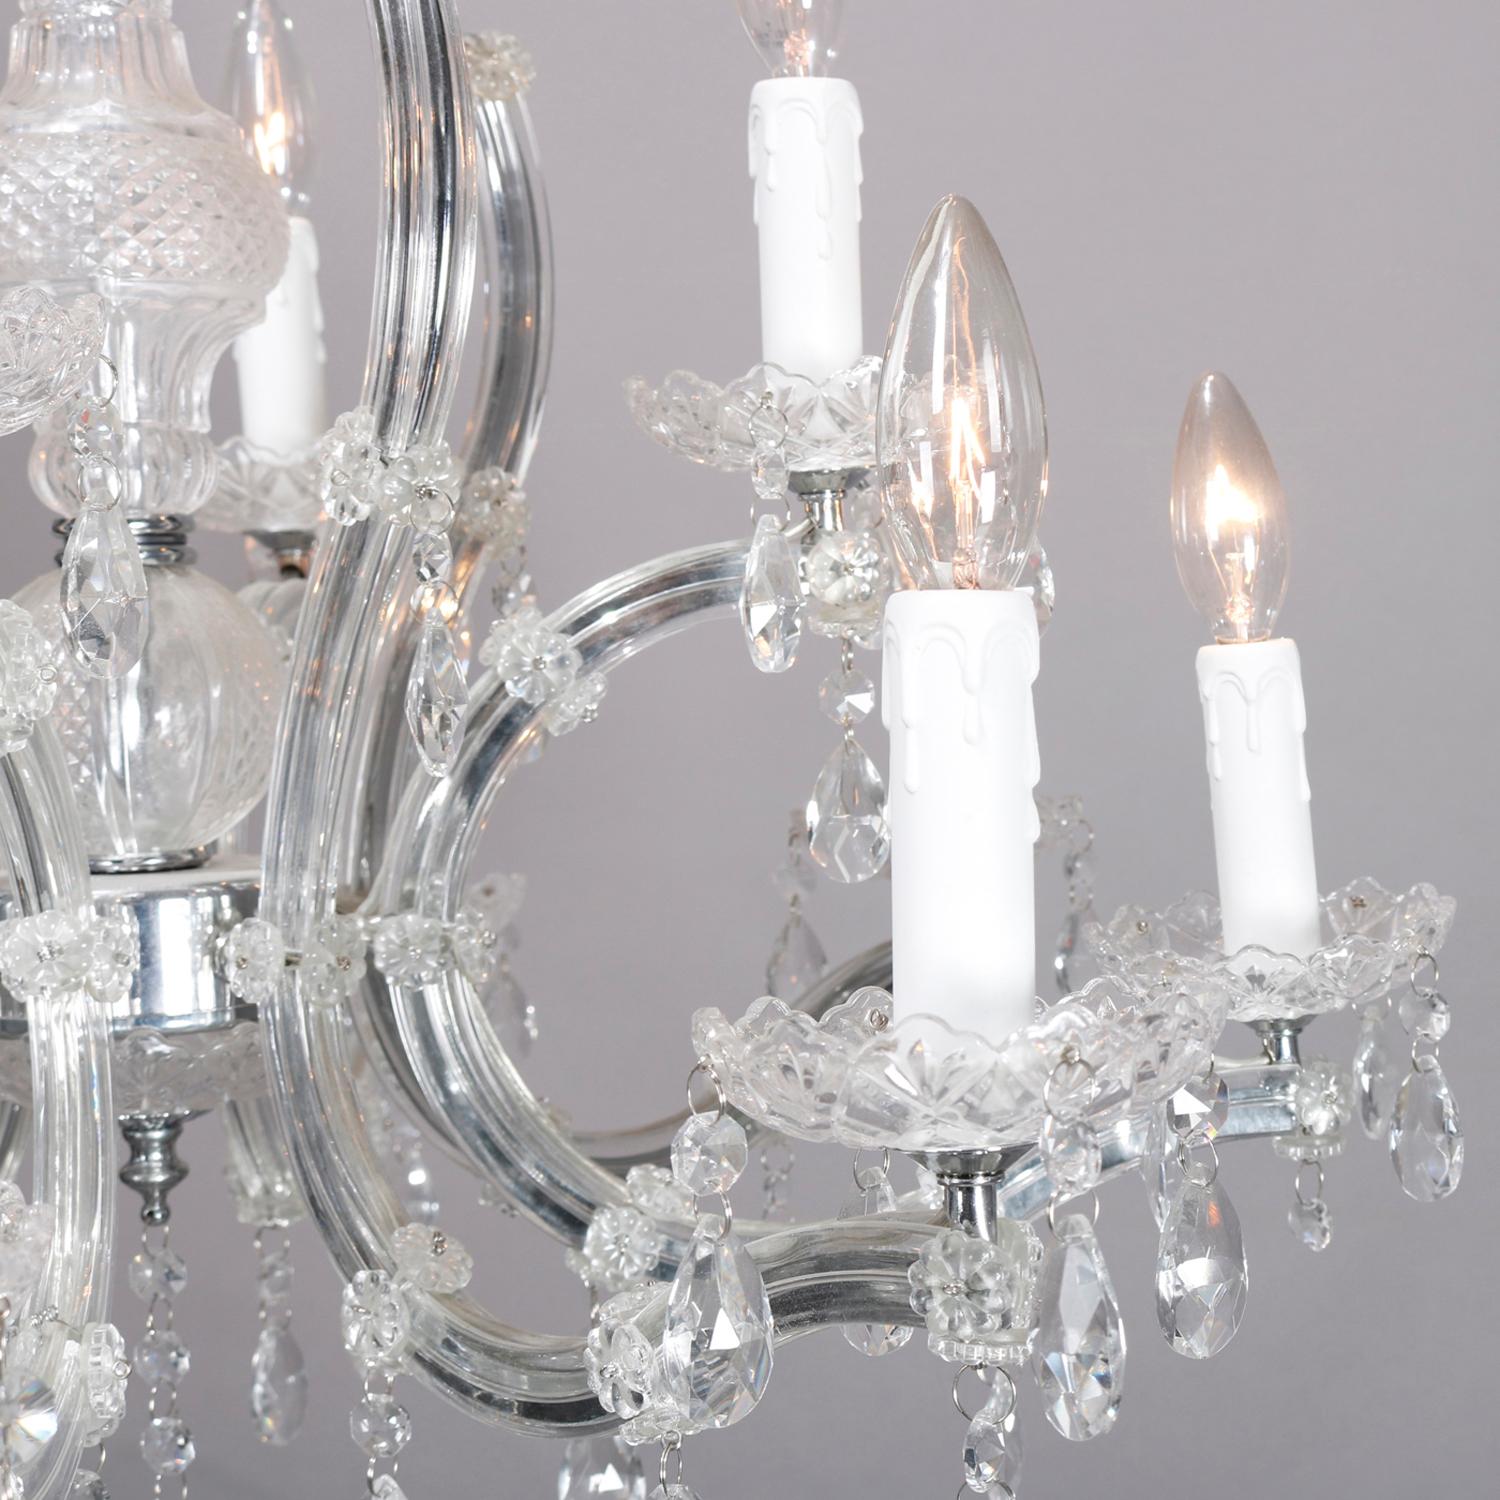 A vintage Italian crystal chandelier offers chrome frame having twelve scroll form arms terminating in candle lights, hanging cut crystals throughout, 20th century

***DELIVERY NOTICE – Due to COVID-19 we are employing NO-CONTACT PRACTICES in the